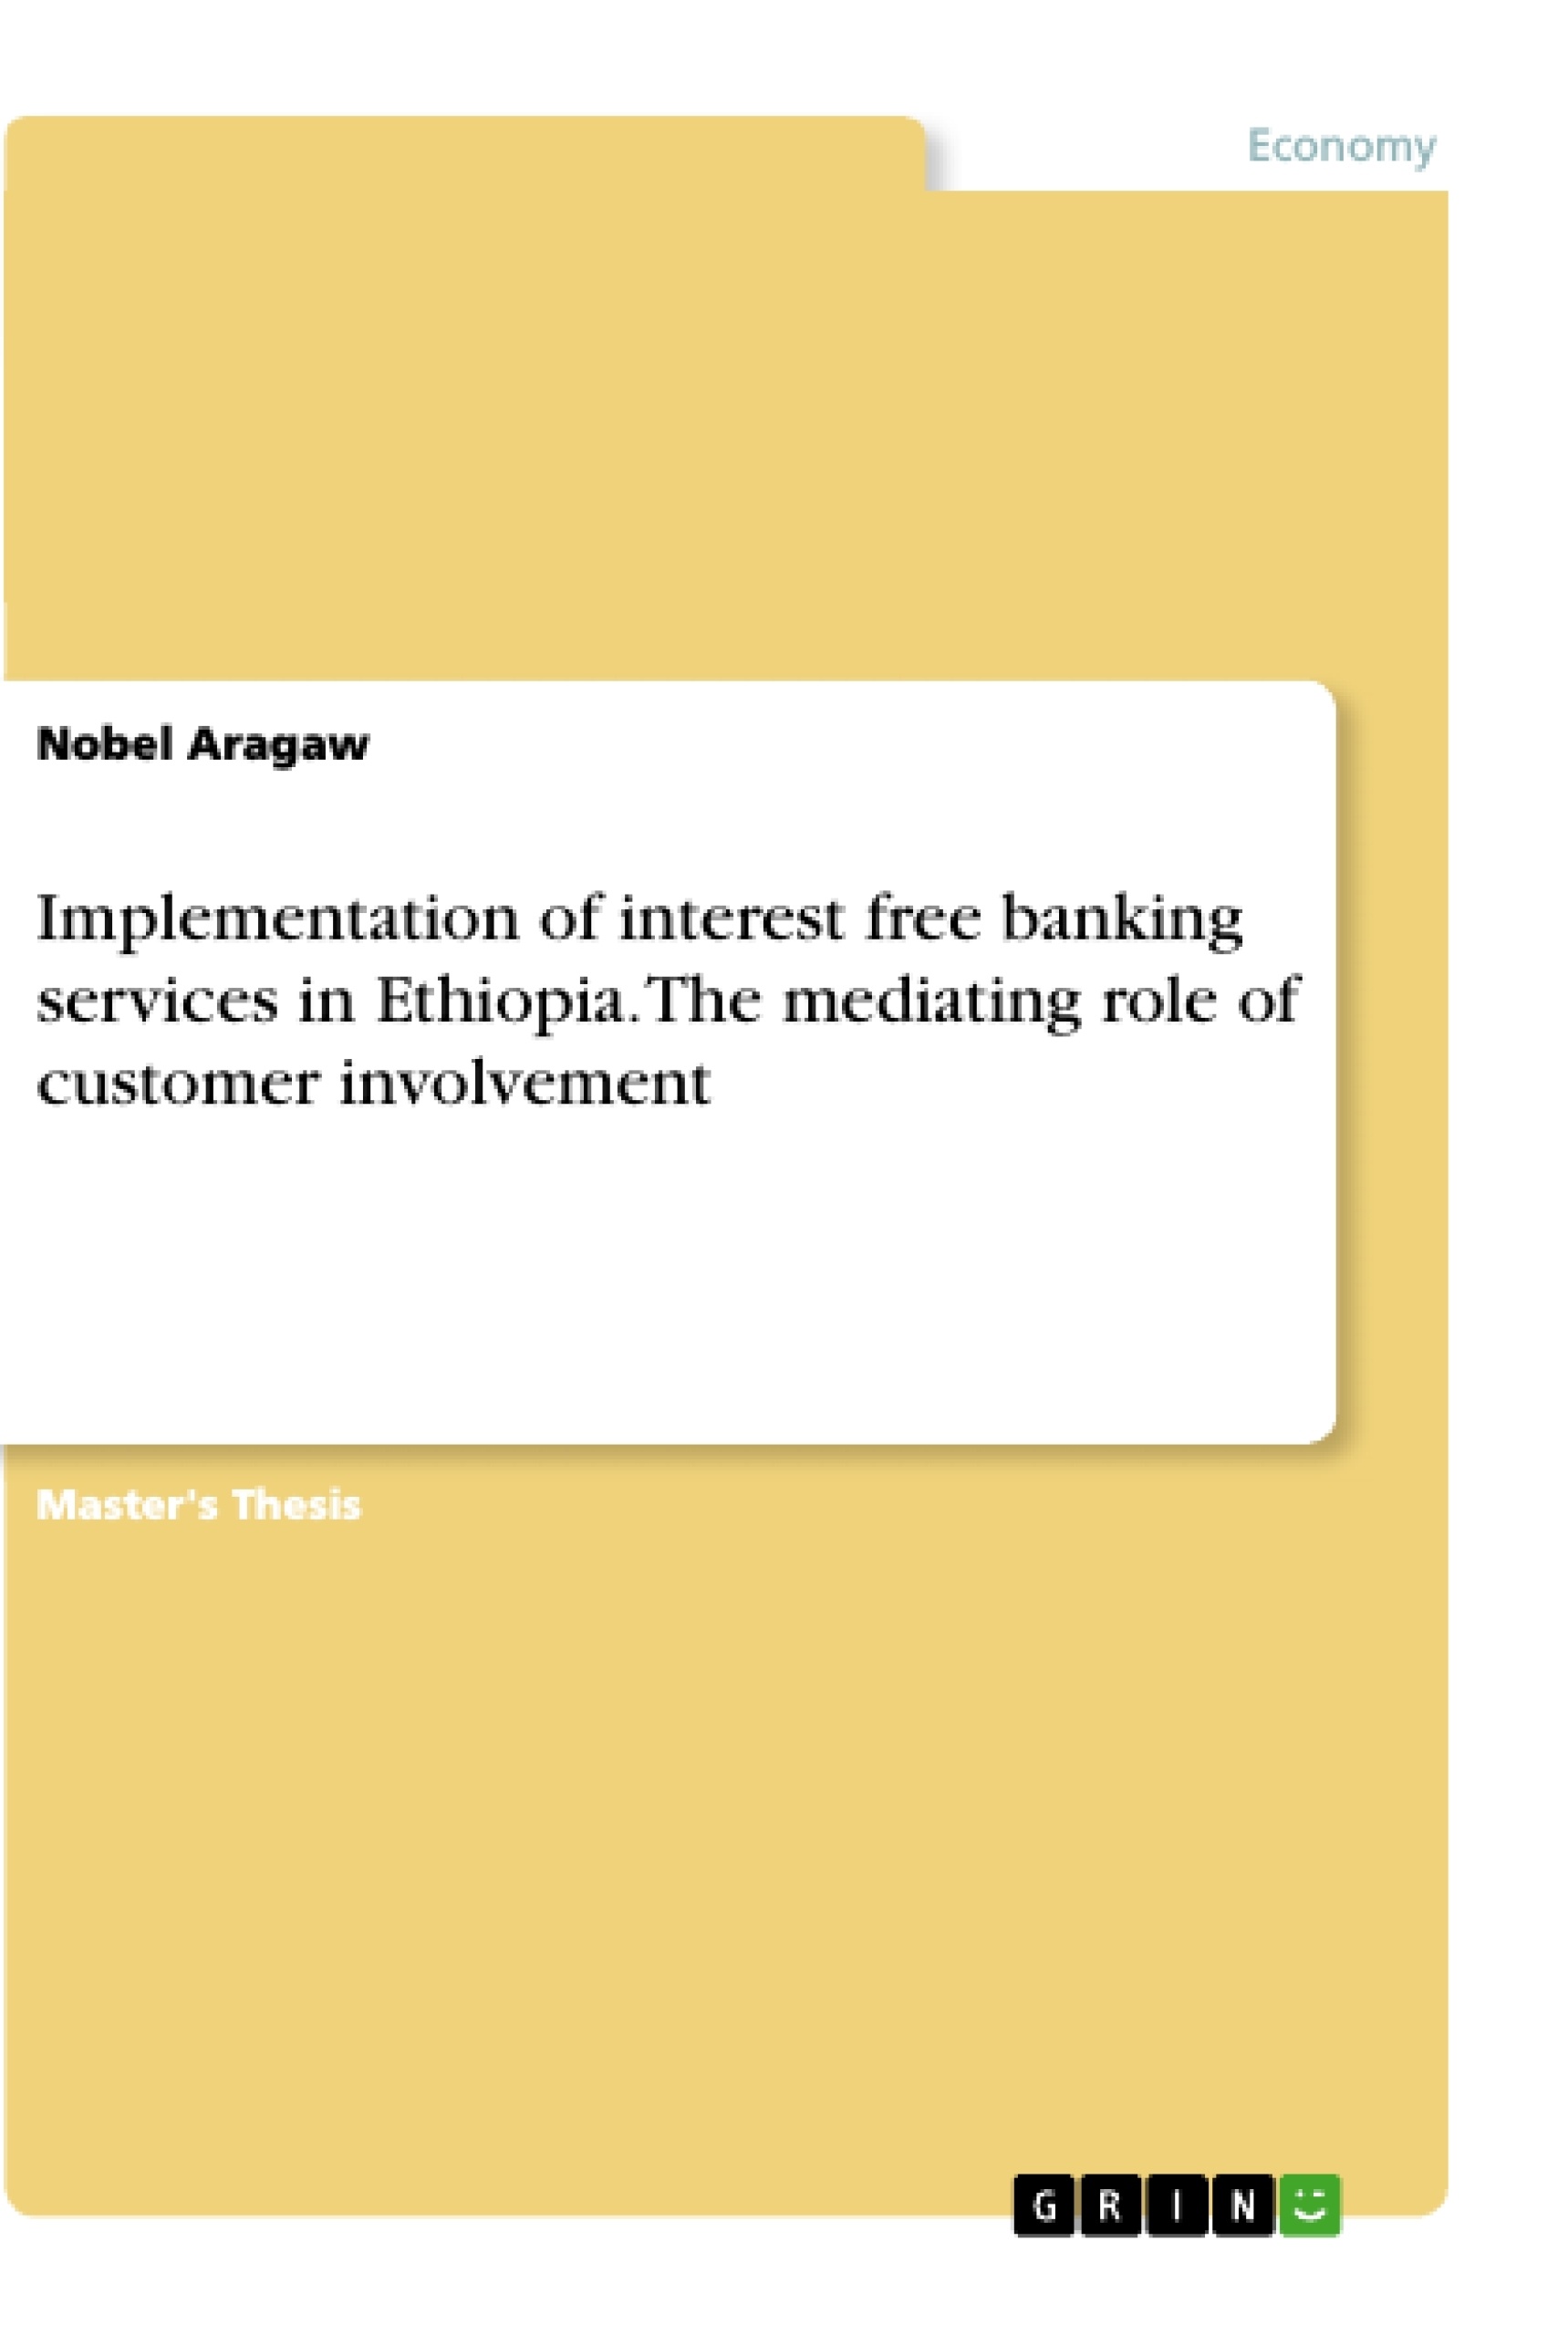 Title: Implementation of interest free banking services in Ethiopia. The mediating role of customer involvement